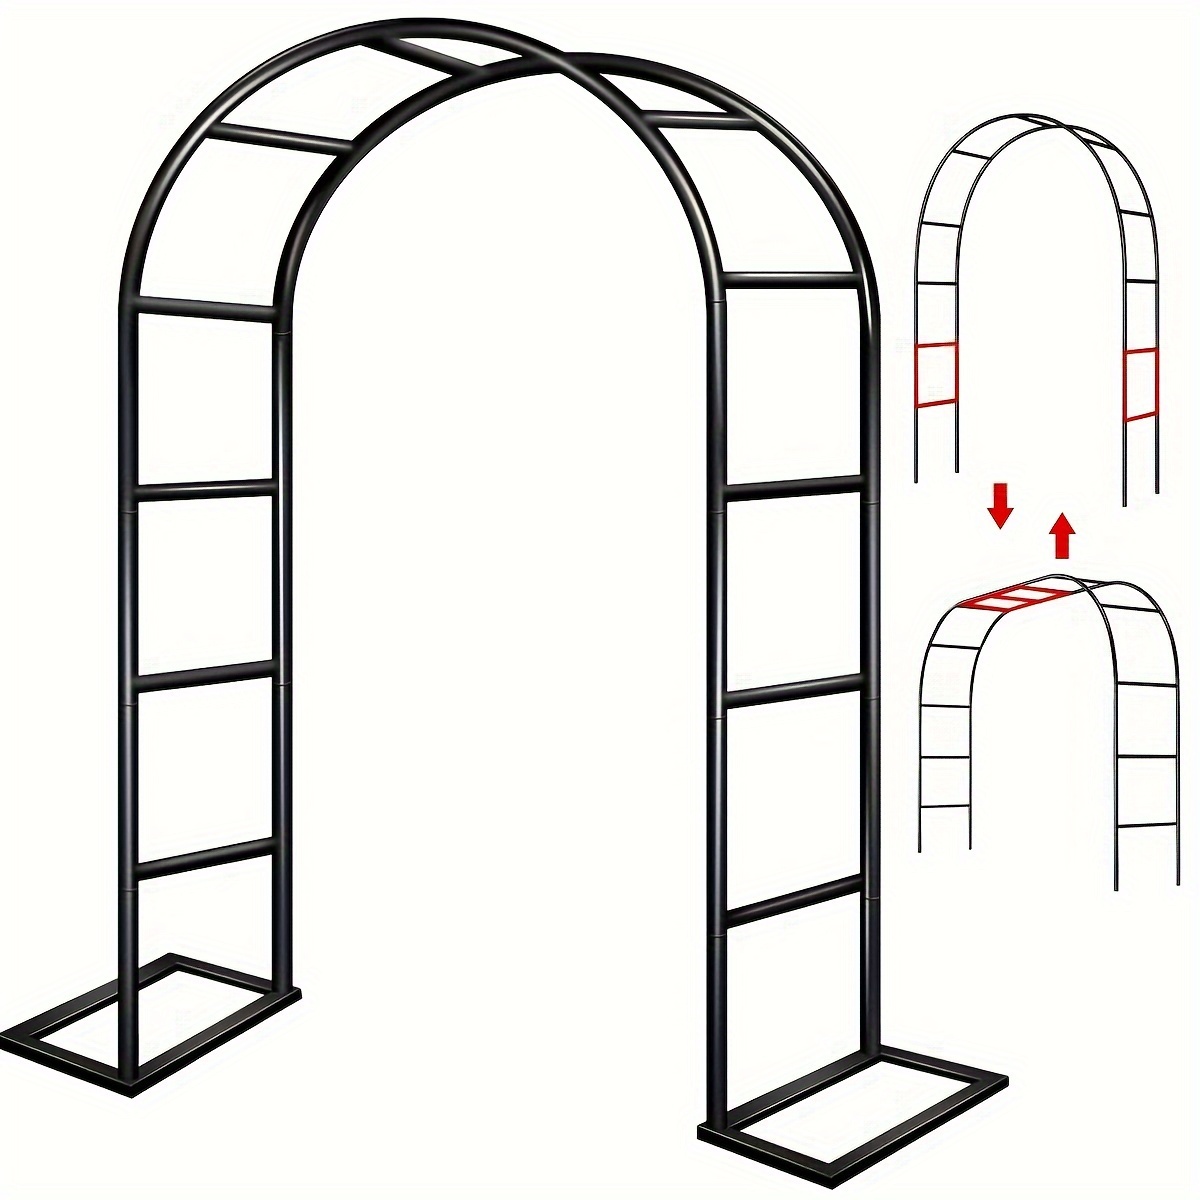 

1pc, Durable Cast Iron Garden Arch, Made With A Heavy Steel Frame, Perfect For Climbing Plants, Roses, Vegetables, Balloon Arches, Enhancing Outdoor Decor, No Electricity Needed